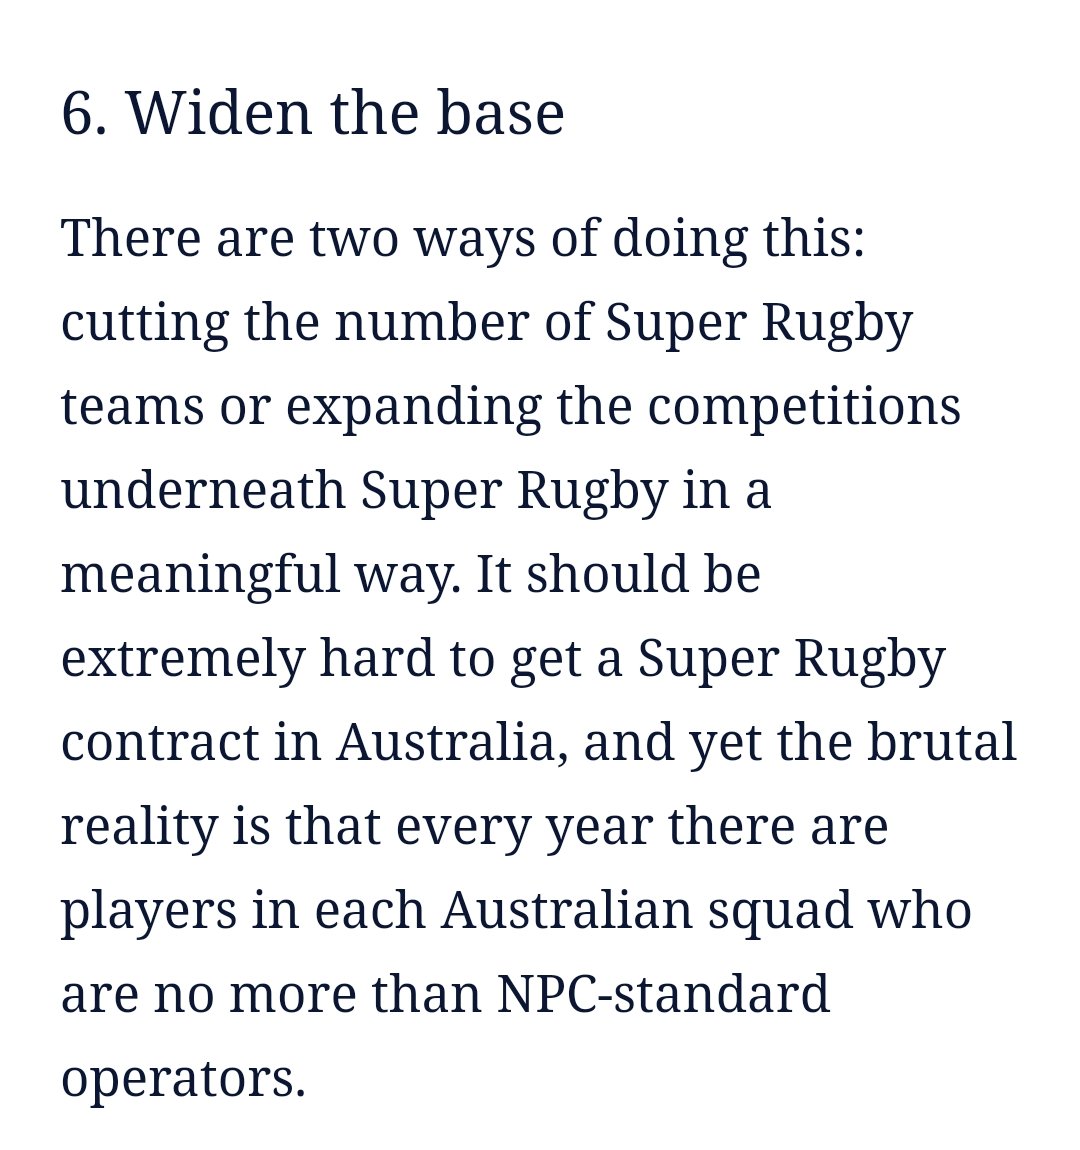 Can someone explain @paulcullystuff's logic to me? How does reducing the player base by cutting the number of Super Rugby teams widen the base?

#australianrugby